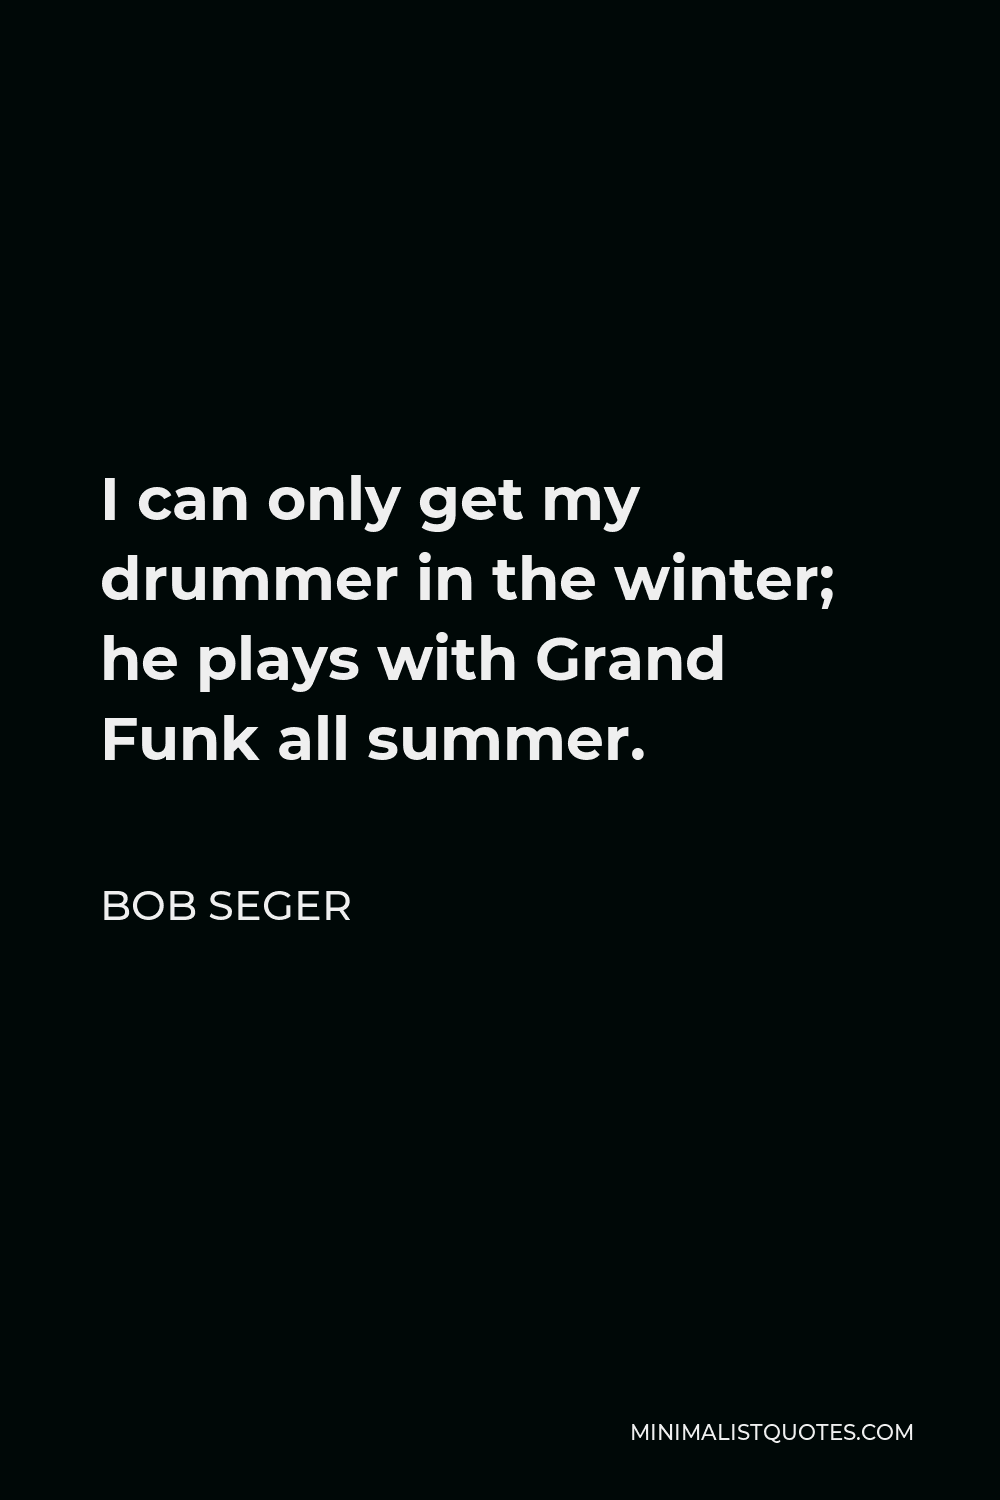 Bob Seger Quote - I can only get my drummer in the winter; he plays with Grand Funk all summer.